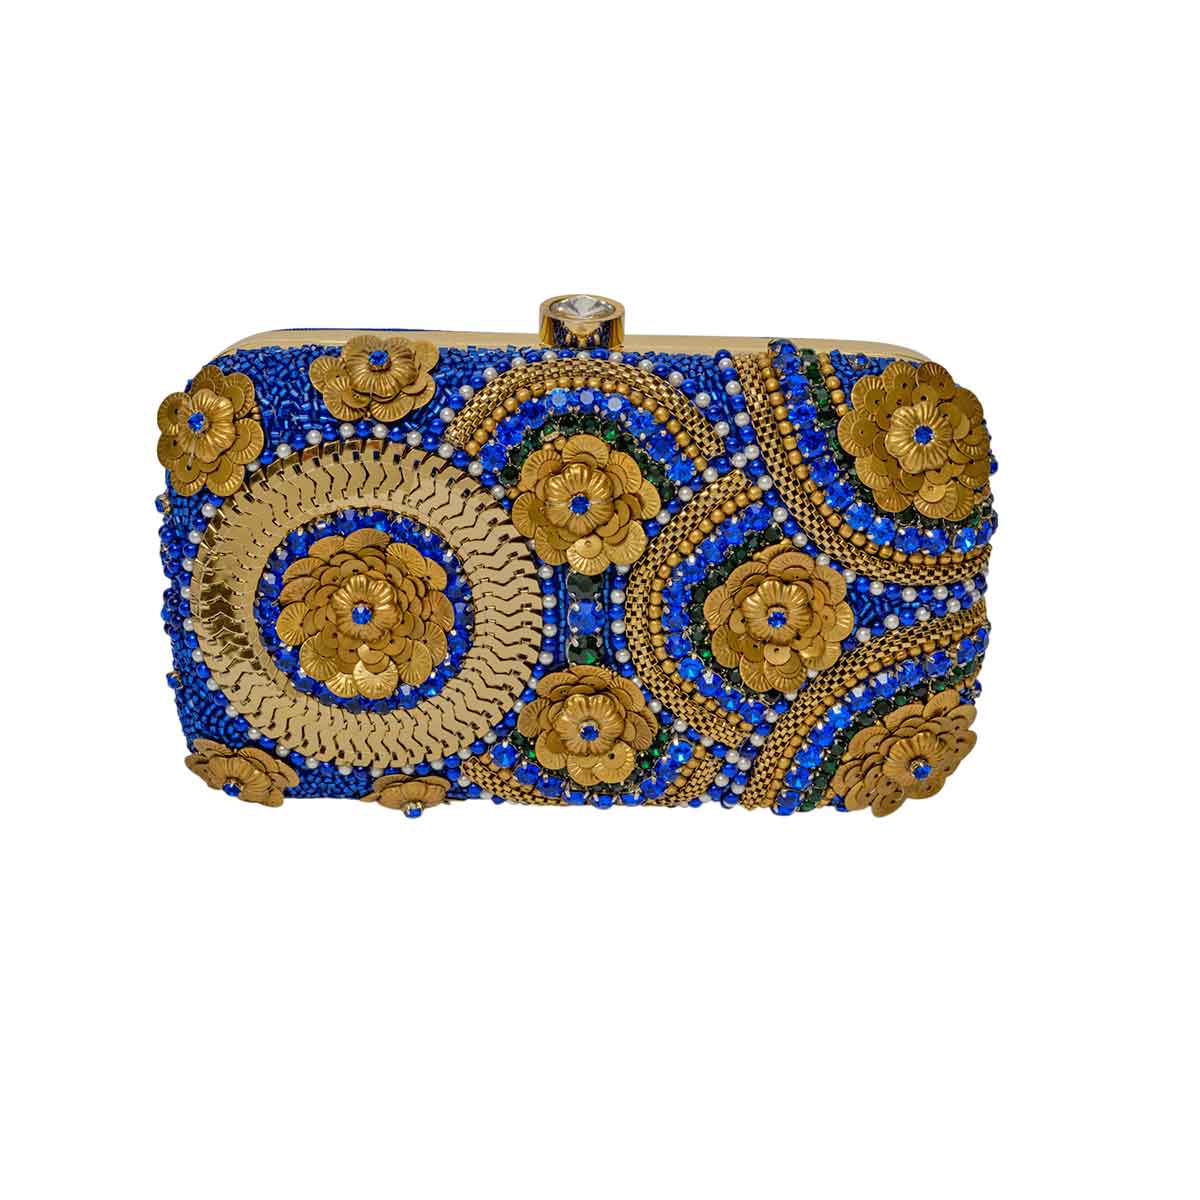 Academyus Women Sequins Coin Purse Bling-Bling India | Ubuy